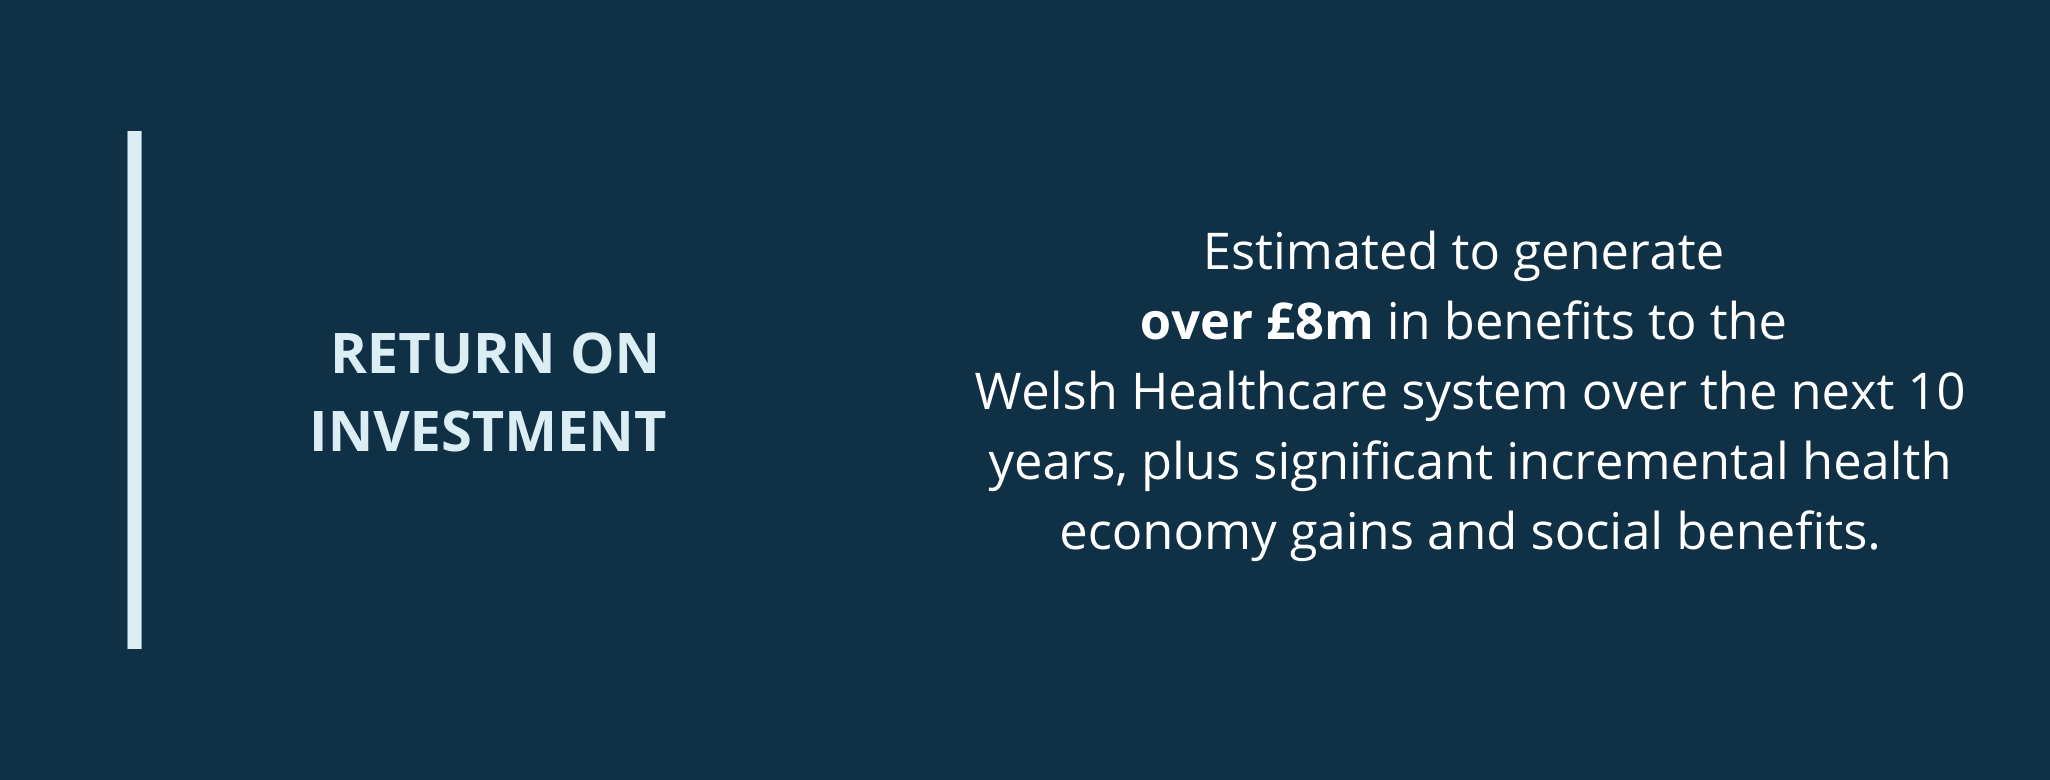 NHS Wales Shared Services Partnership – ROI